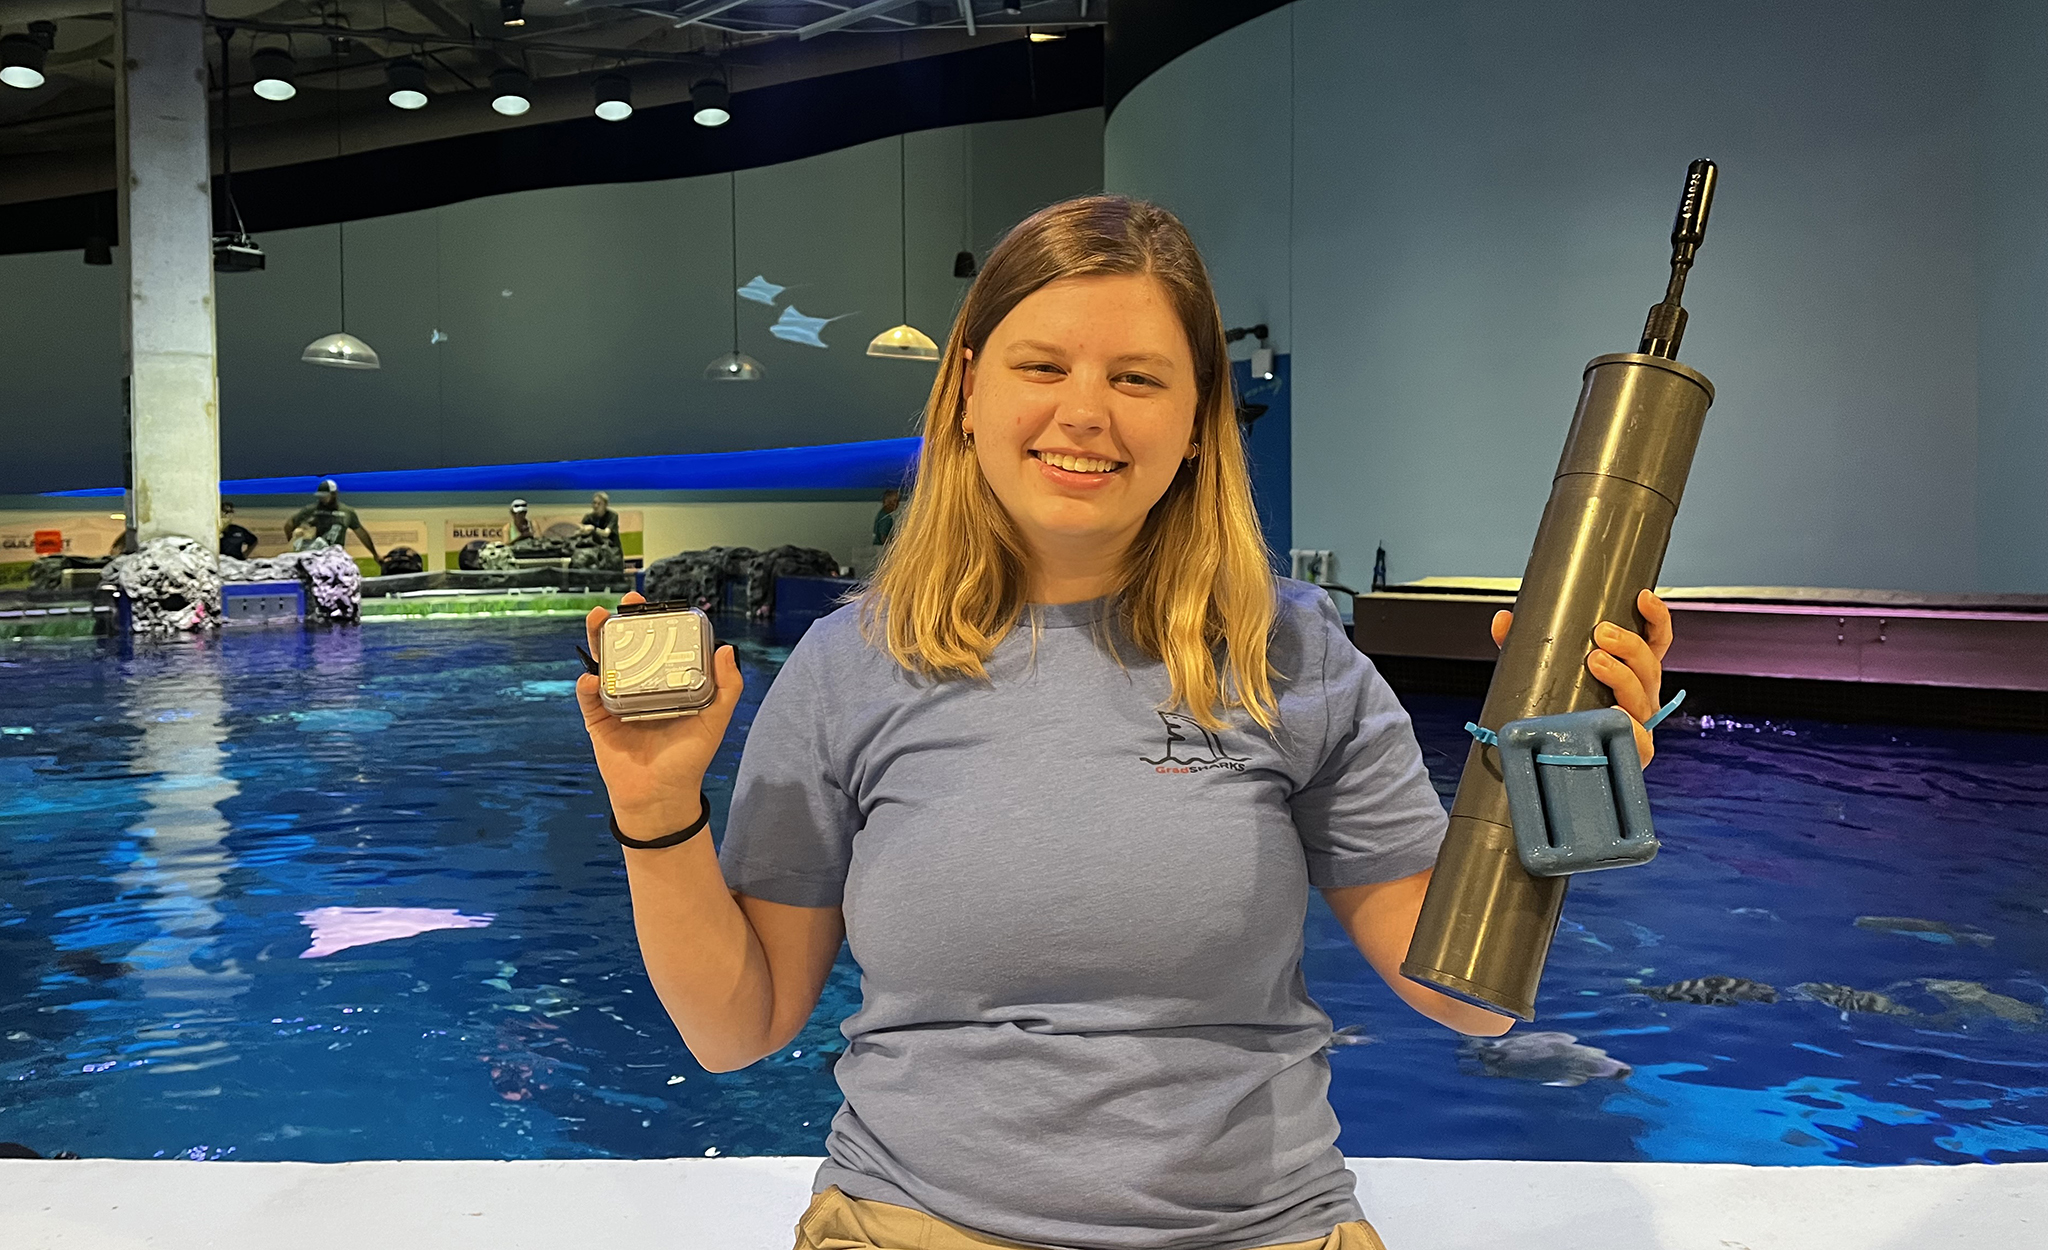 Kayleigh Mazariegos shows off some of the equipment she used to capture the sounds of underwater creatures in the Gulf of Mexico at the Mississippi Aquarium. Mazariegos partnered with the aquarium on the study, which aims to determine whether fish vocalizations can be used to identify various species. Submitted photo